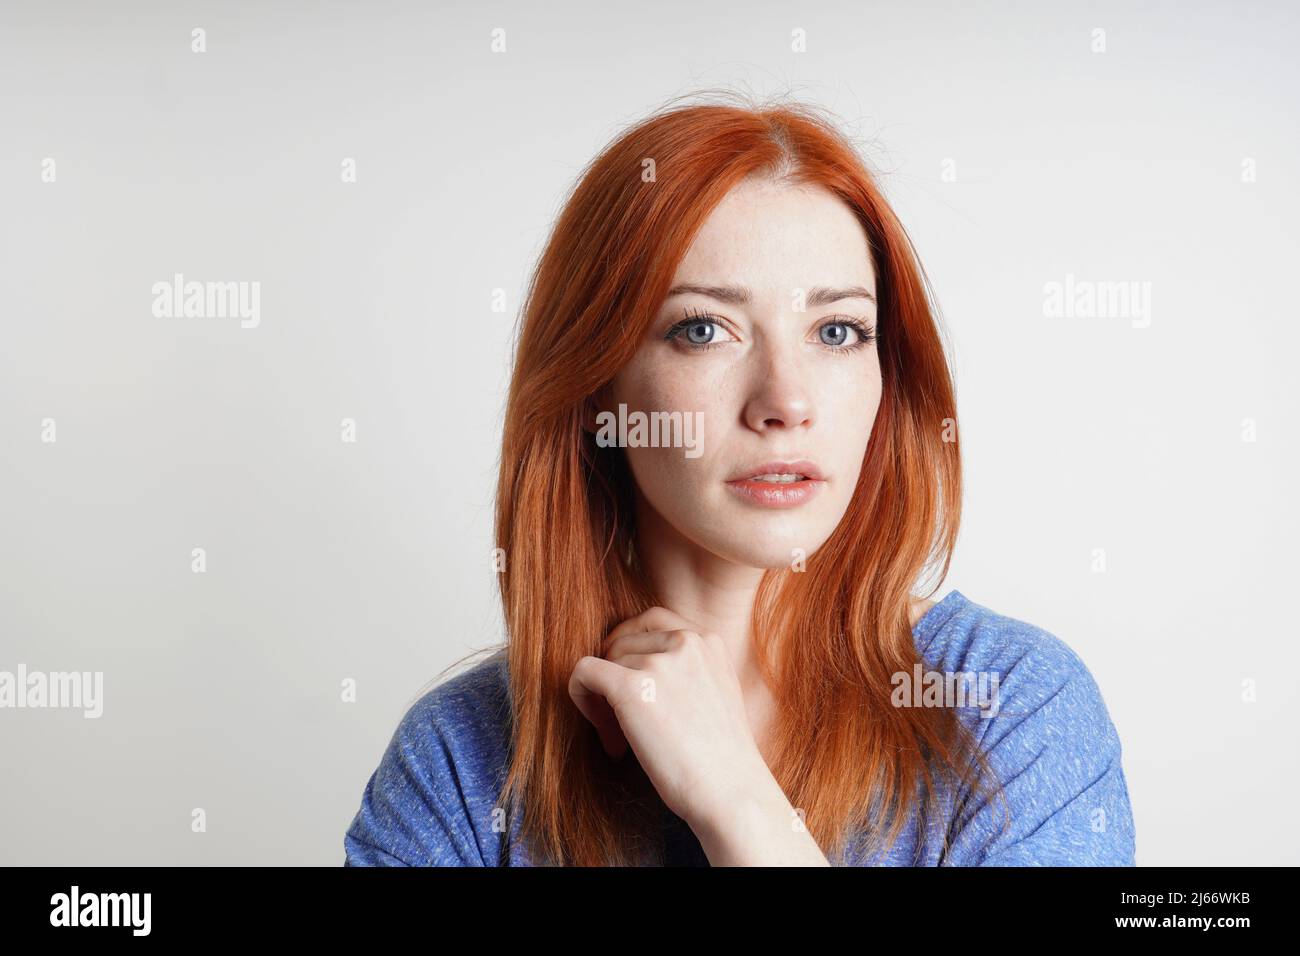 contemplative mid adult woman thinking with neutral but positive expression Stock Photo